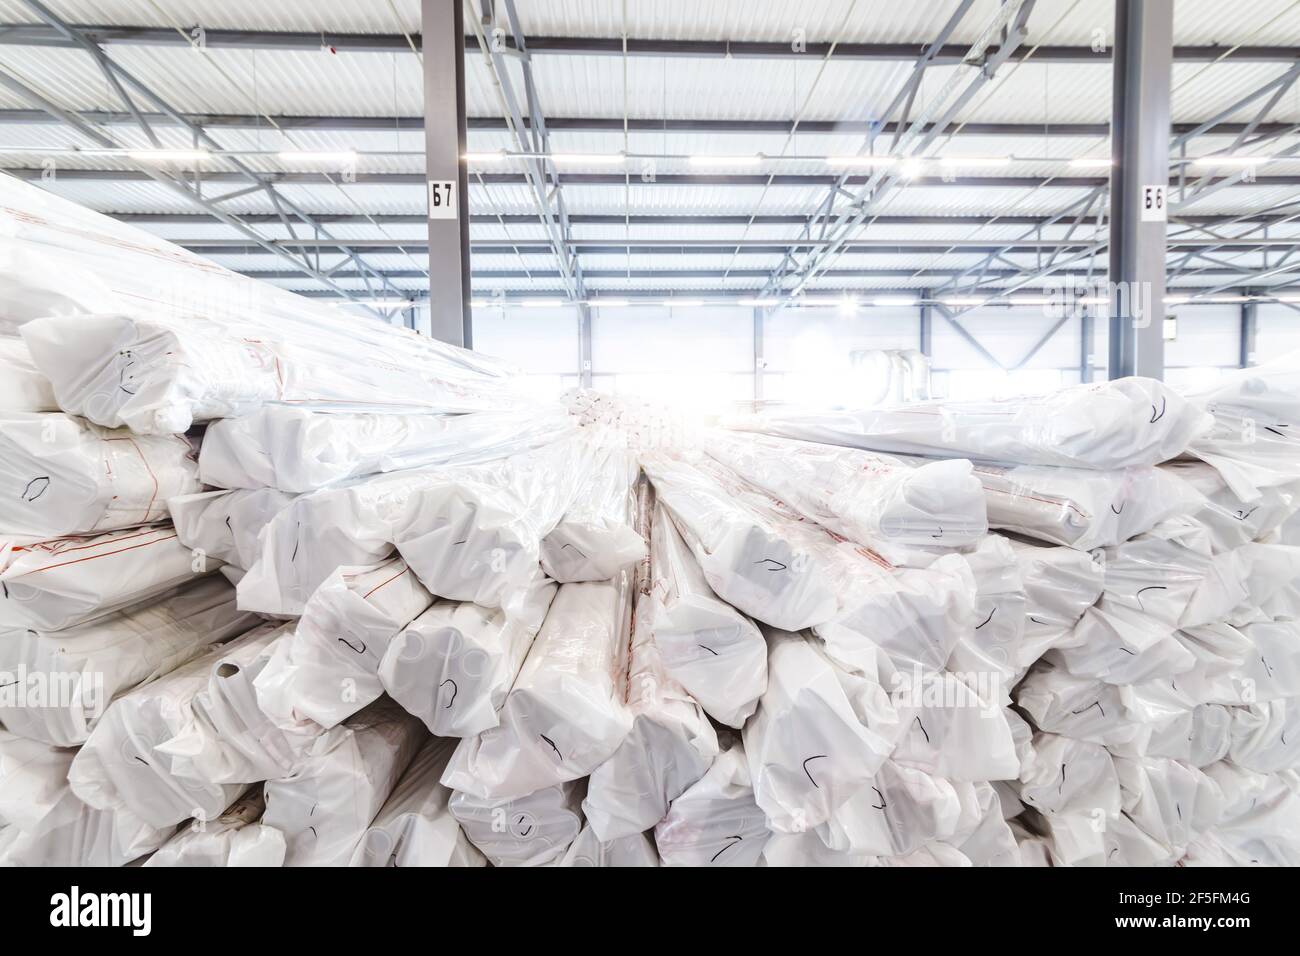 Warehousing of finished products for shipment to consumers at the factory. Stock Photo